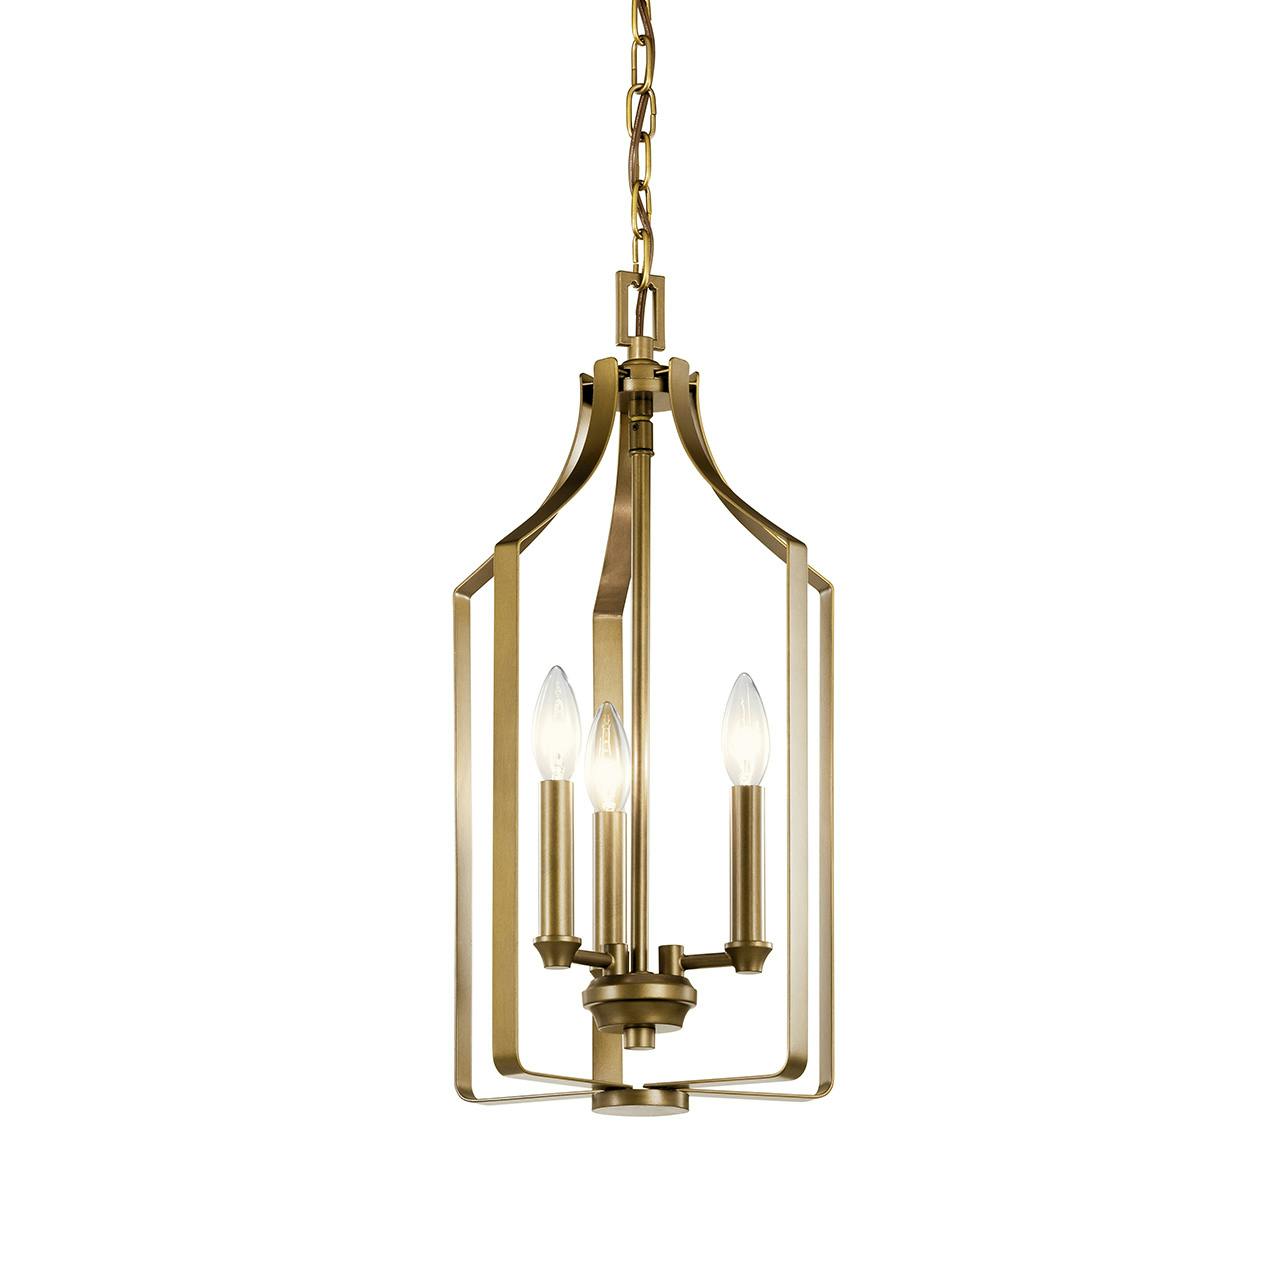 Morrigan 21" 3 Light Foyer Pendant Brass without the canopy on a white background